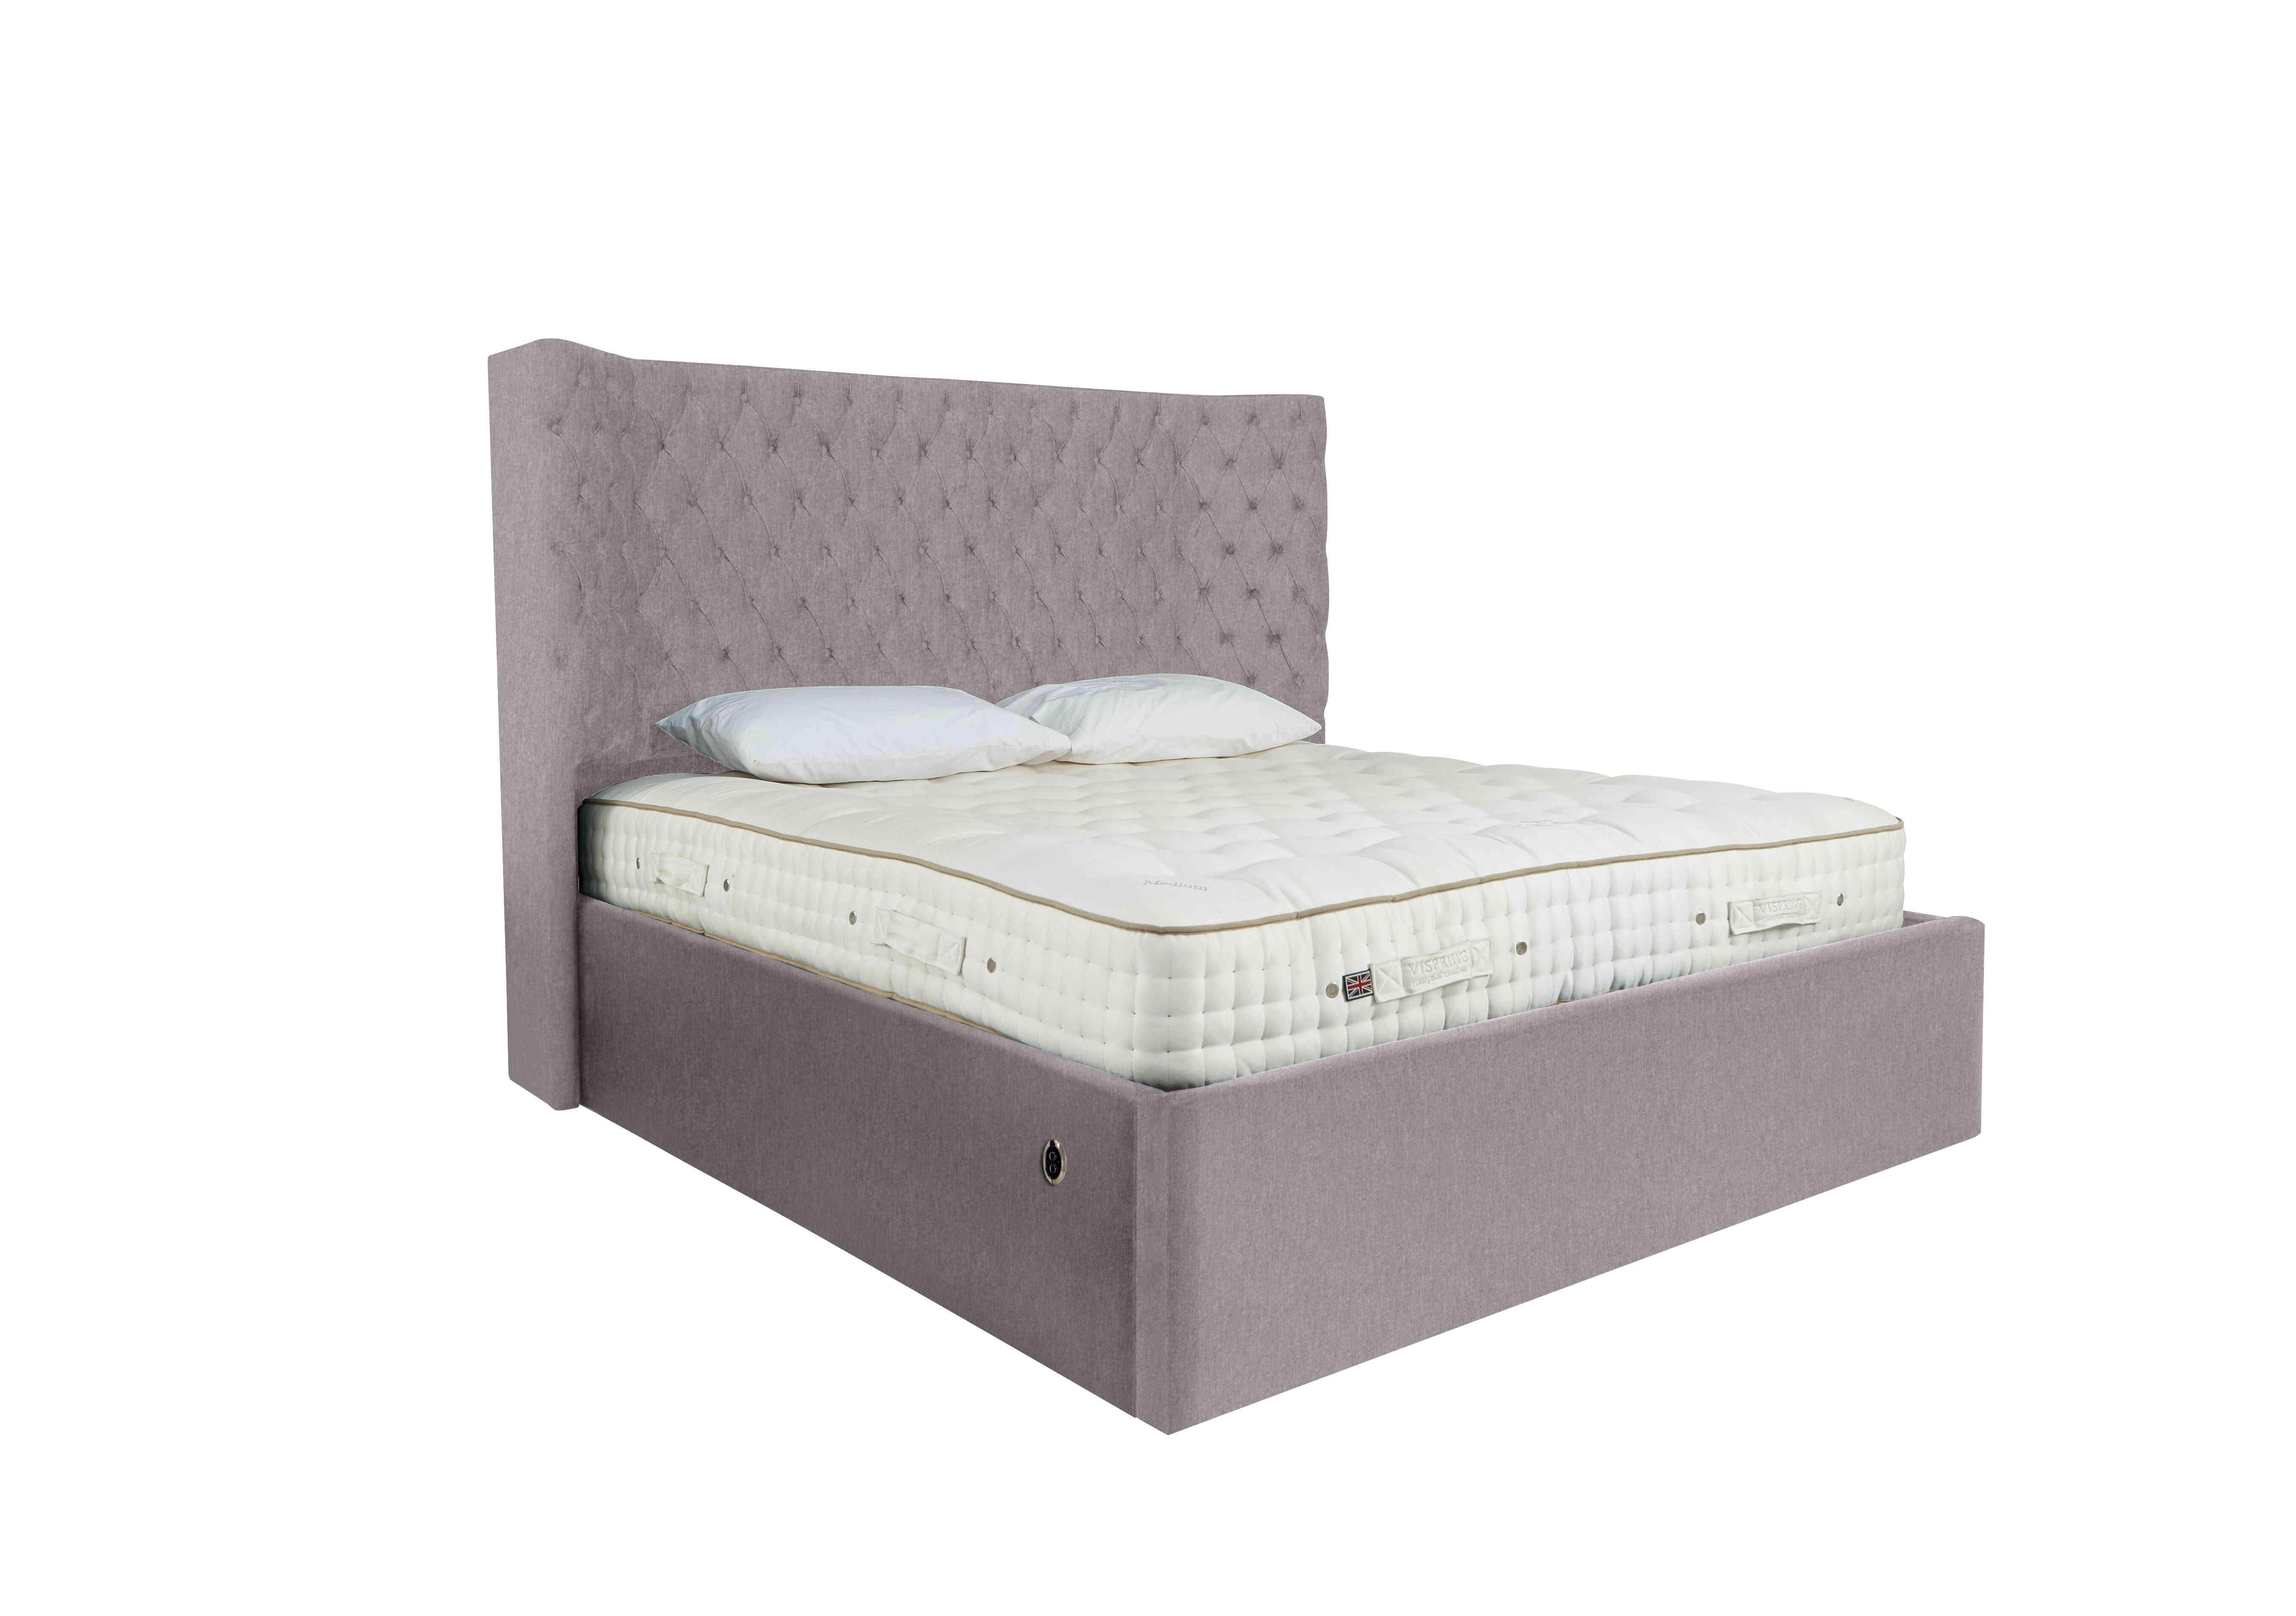 Maximus Electric Ottoman Bed Frame in Linnet Nickel on Furniture Village